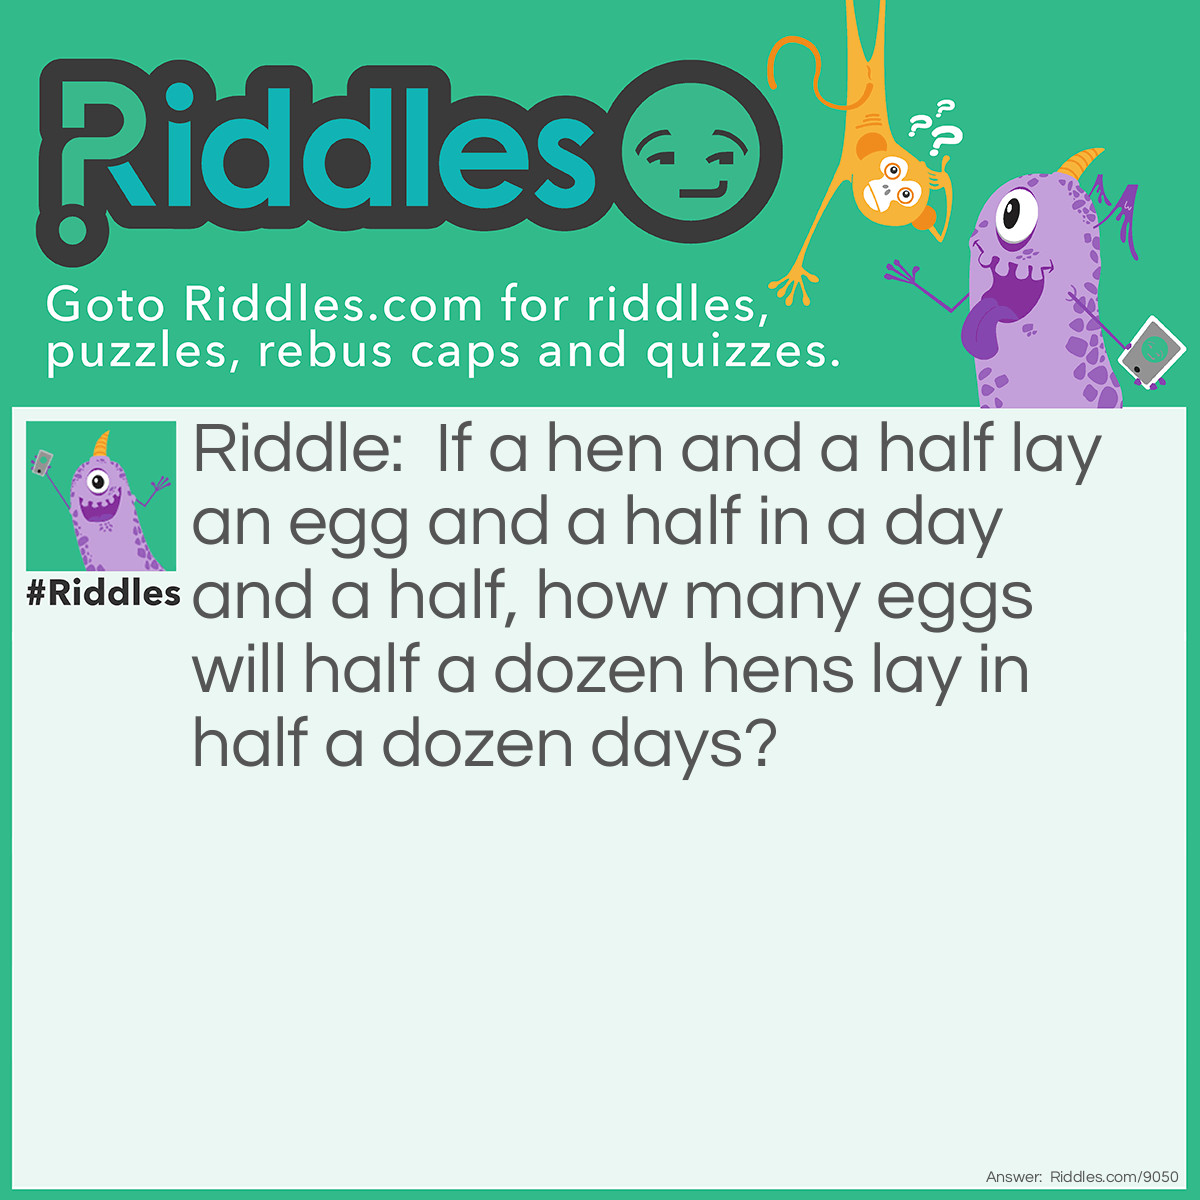 Riddle: If a hen and a half lay an egg and a half in a day and a half, how many eggs will half a dozen hens lay in half a dozen days? Answer: Two dozen. If you increase both the number of hens and the amount of time available four-fold, the number of eggs increases 16 times. 16 x 1.5 = 24.